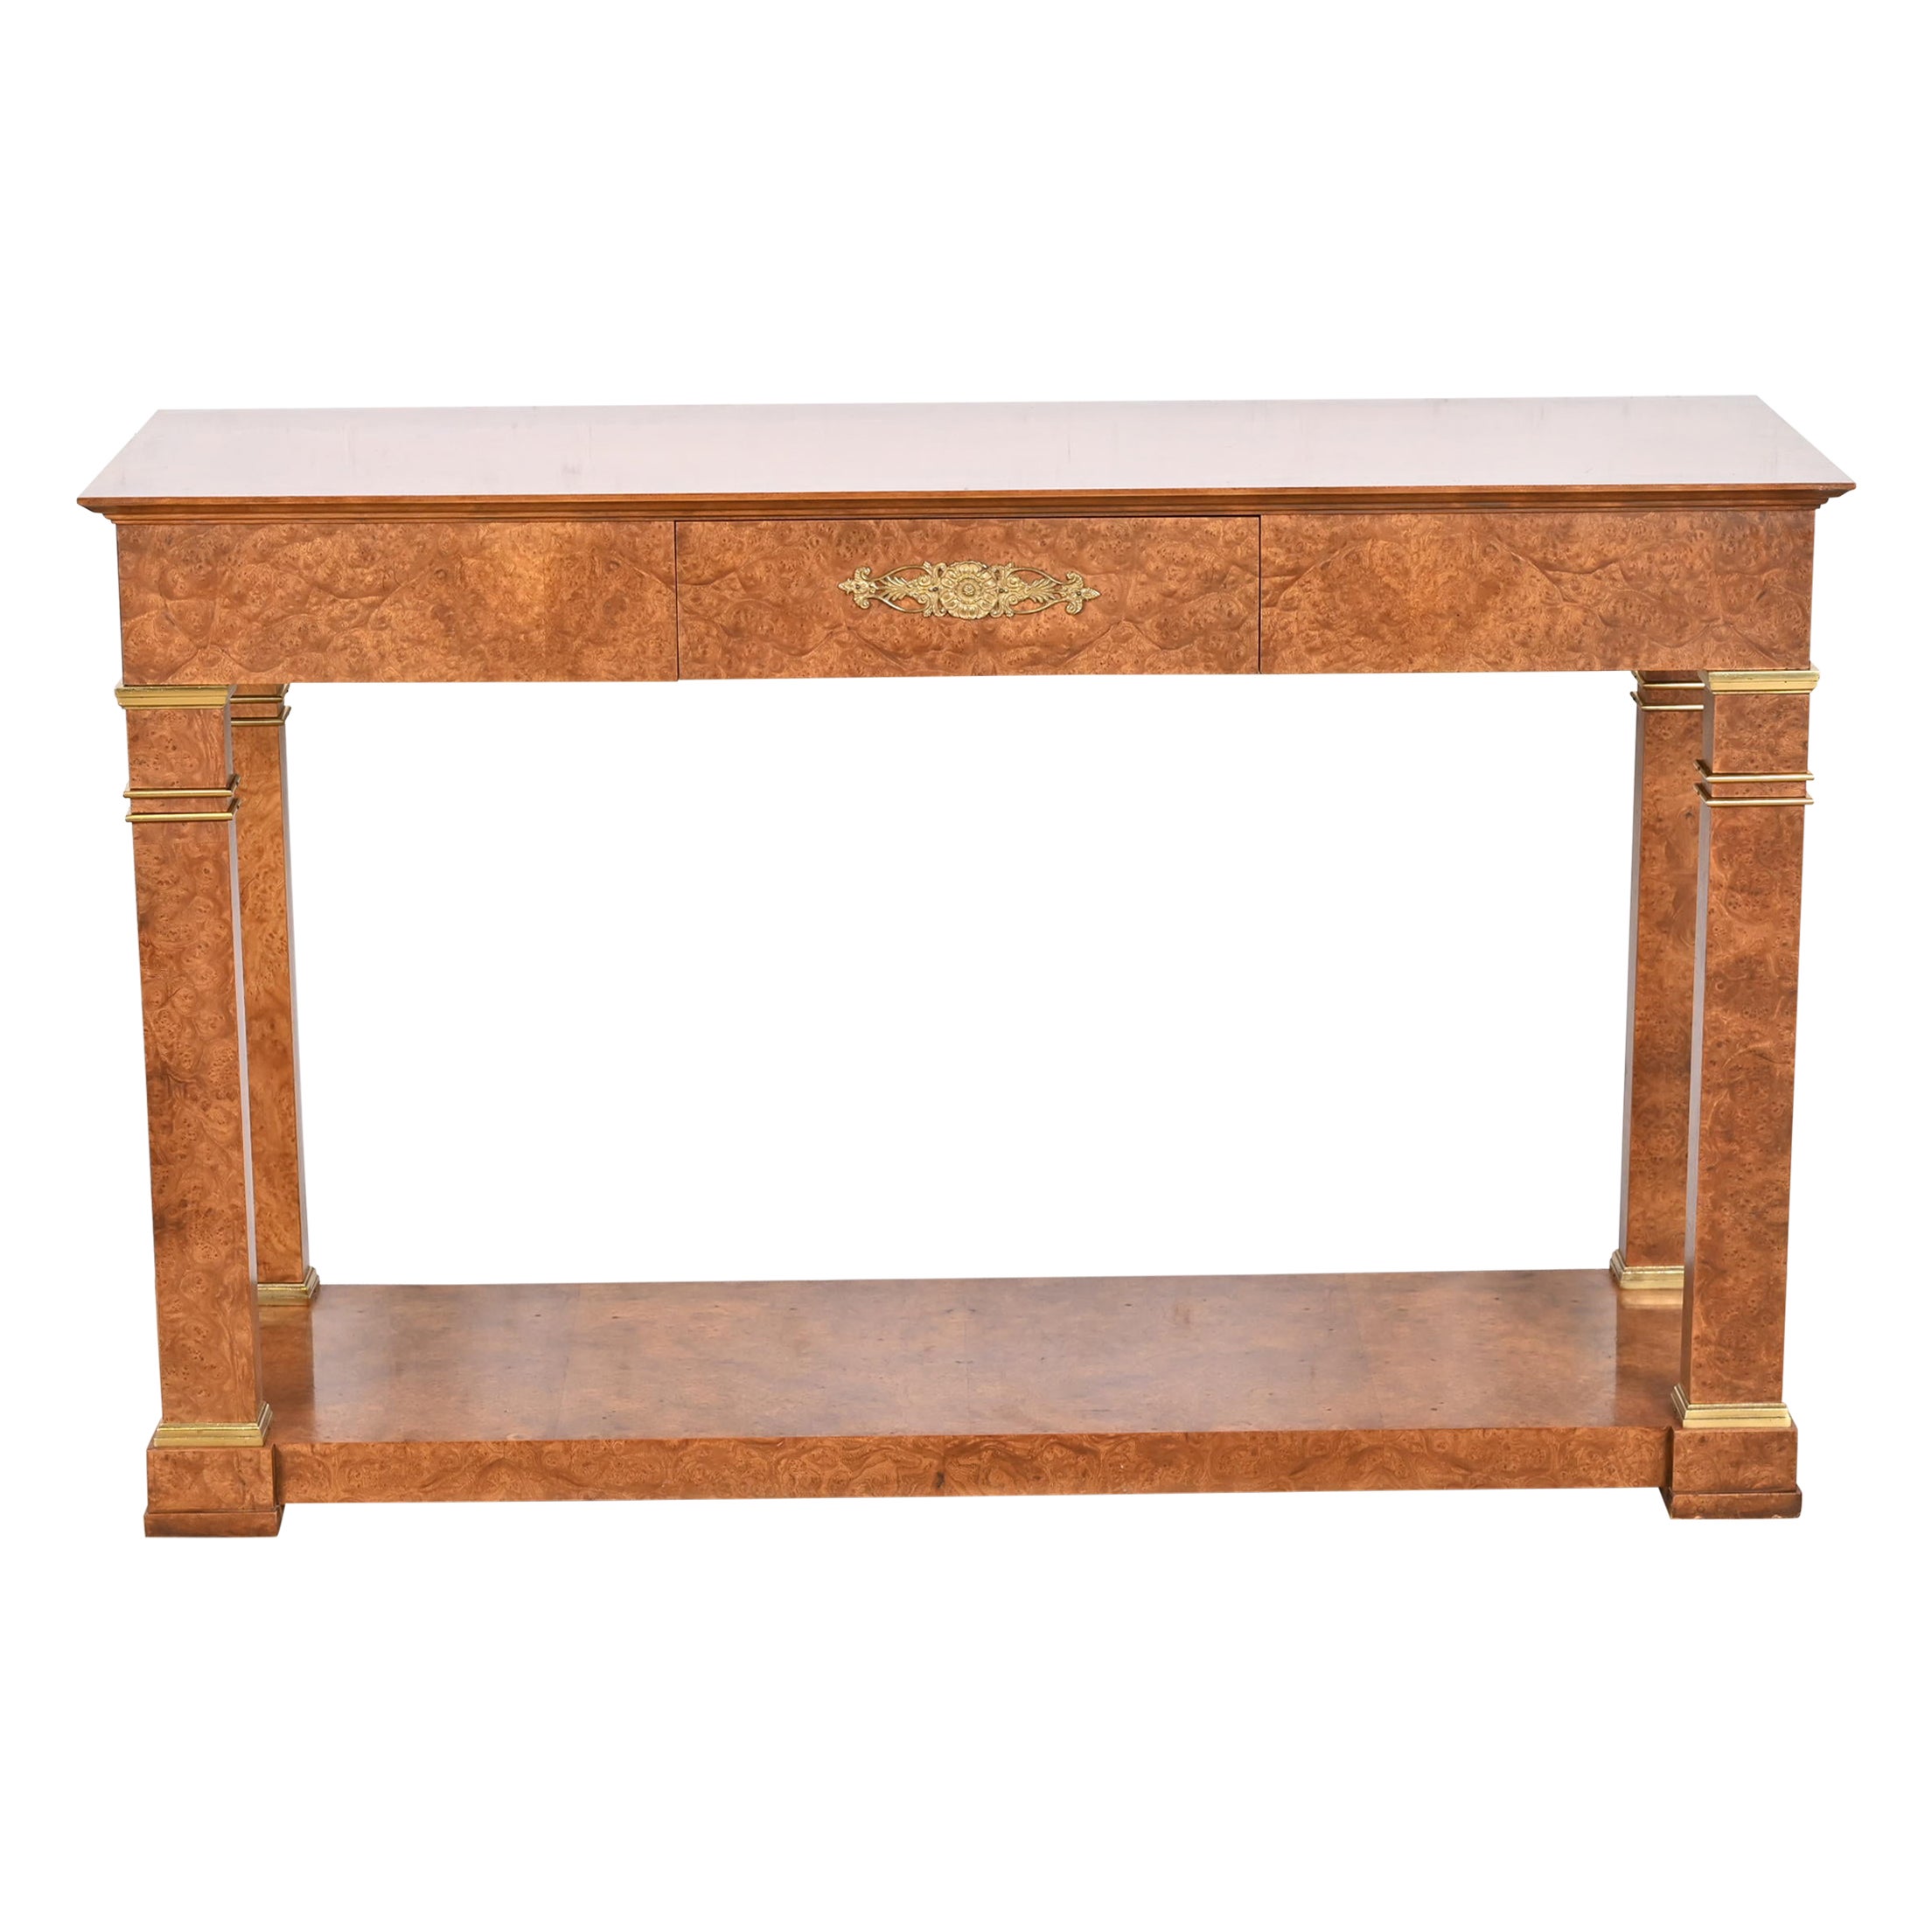 Baker Furniture Neoclassical Burl Wood and Mounted Brass Console or Sofa Table